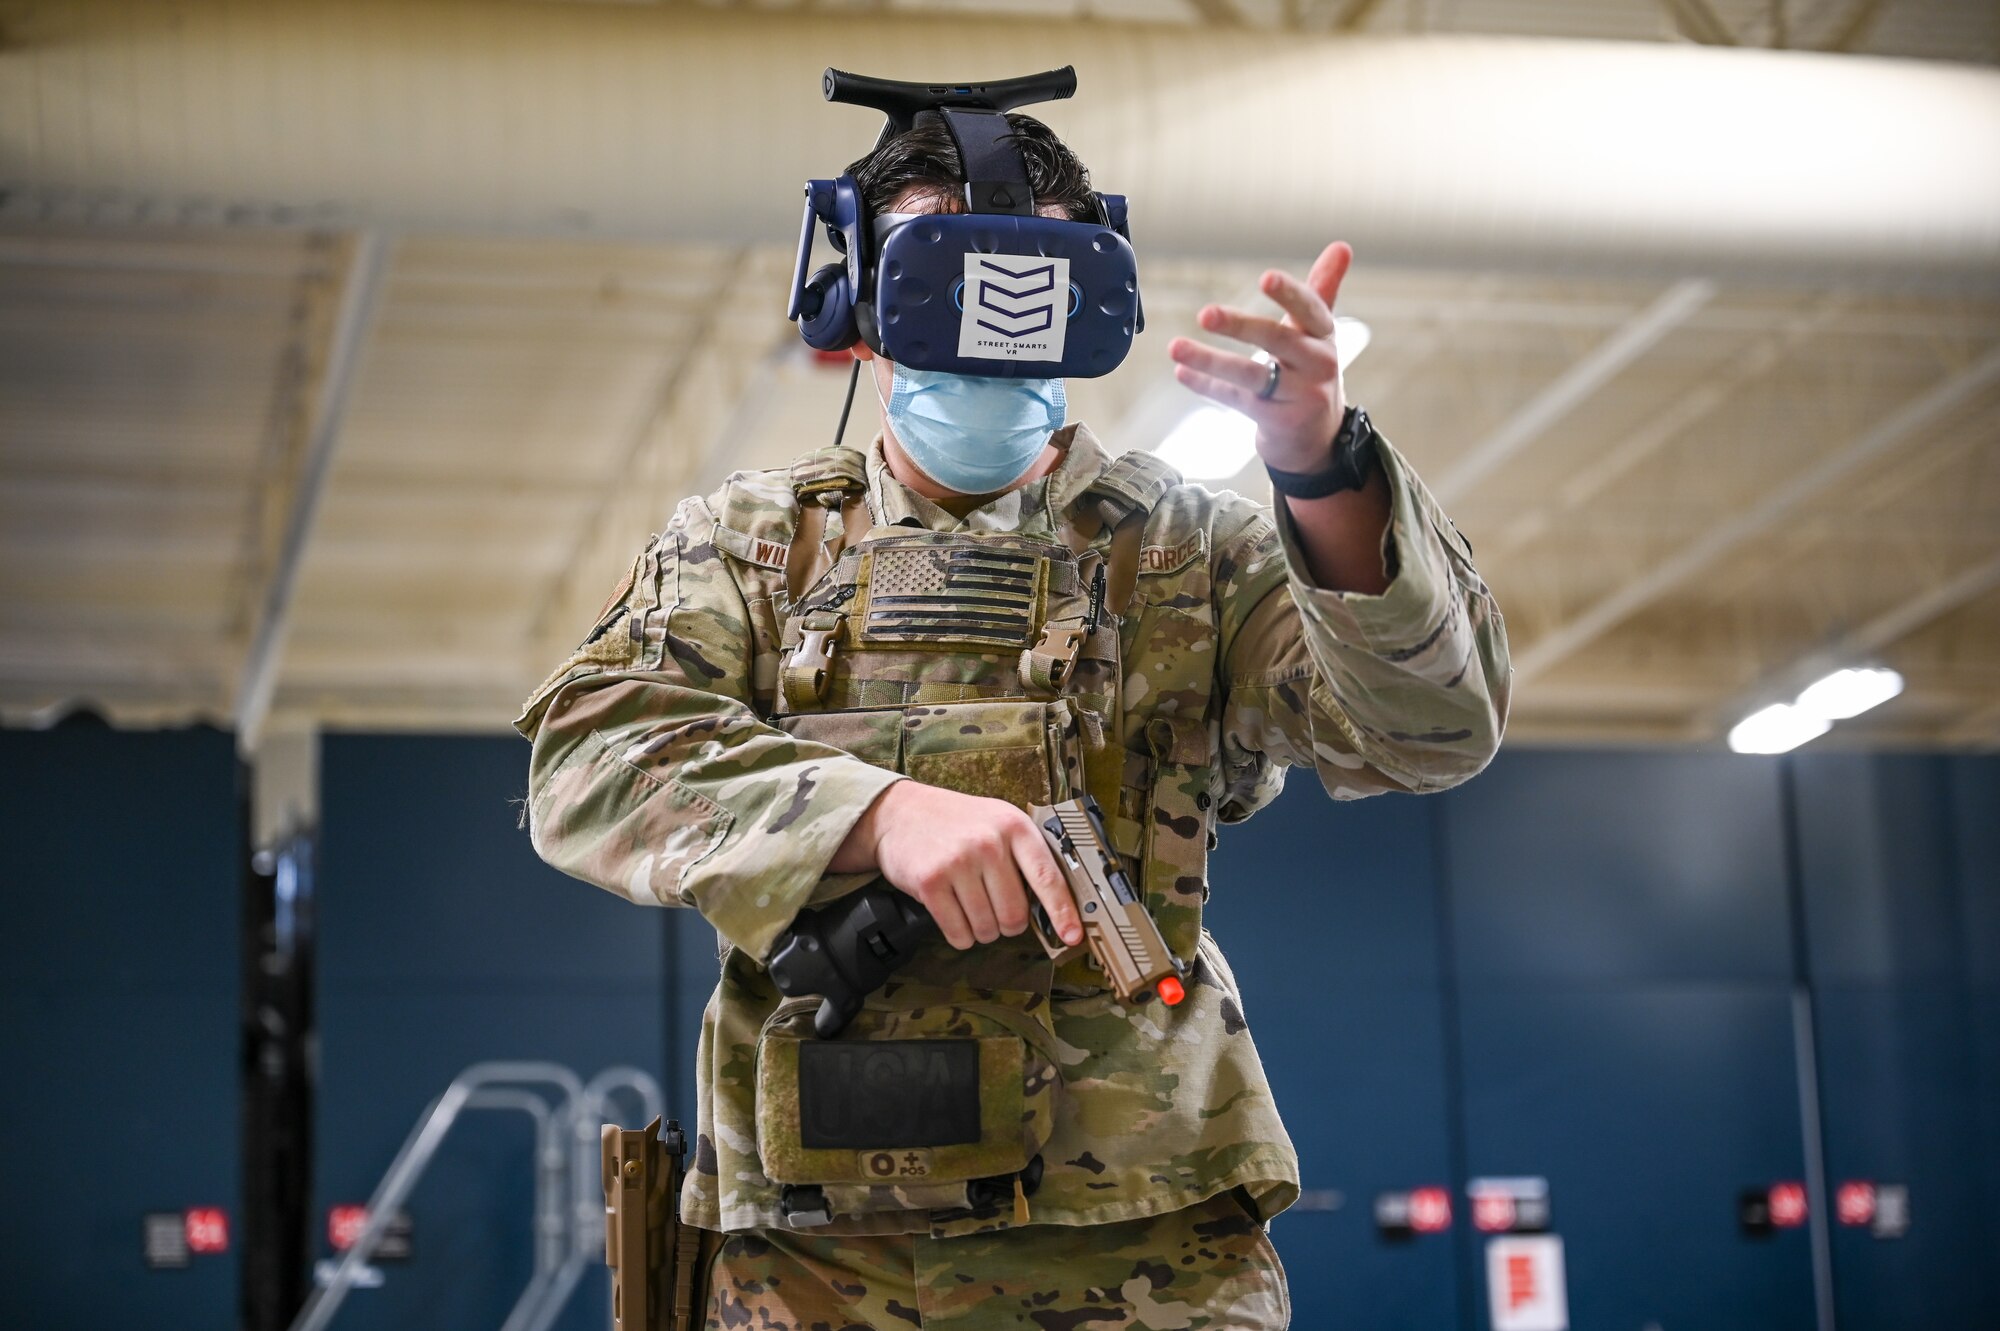 Staff Sgt. Brandon Wilson, 75th Security Forces Squadron, during a de-escalating an armed person scenario using the Street Smarts Virtual Reality system, The squadron recently implemented virtual reality to fully immerse themselves into realistic three-dimensional situations to enhance their training. (U.S. Air Force photo by Cynthia Griggs)